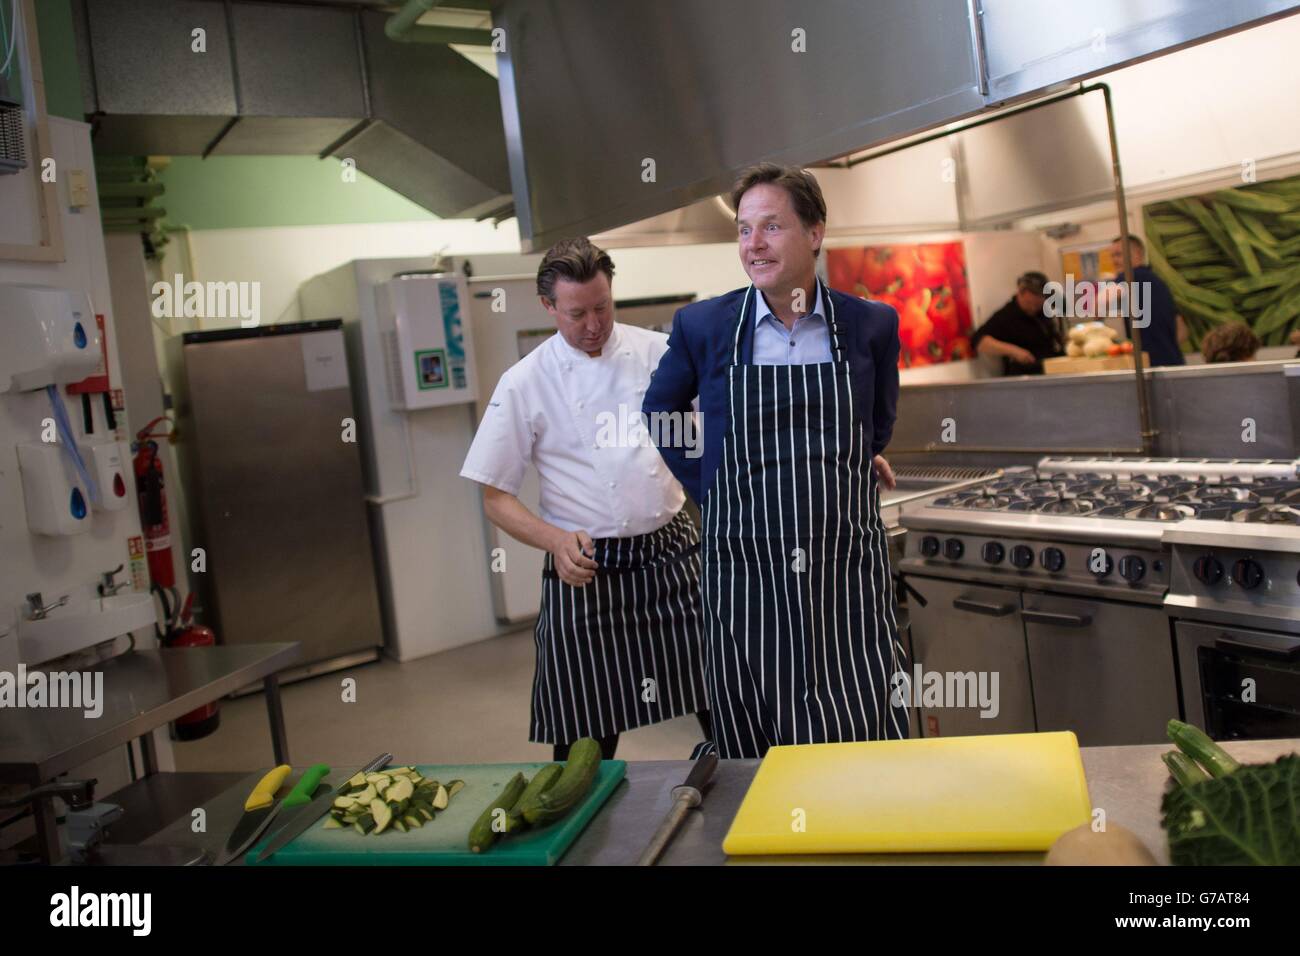 Deputy Prime Minister Nick Clegg puts on an apron with the help of Mark Stower, Director of Food and Service, Harrison Catering Services, during a visit to Clapham Manor Primary School in south west London, where he officially launched the government's scheme to provide 5-7 year olds with free school meals. Stock Photo